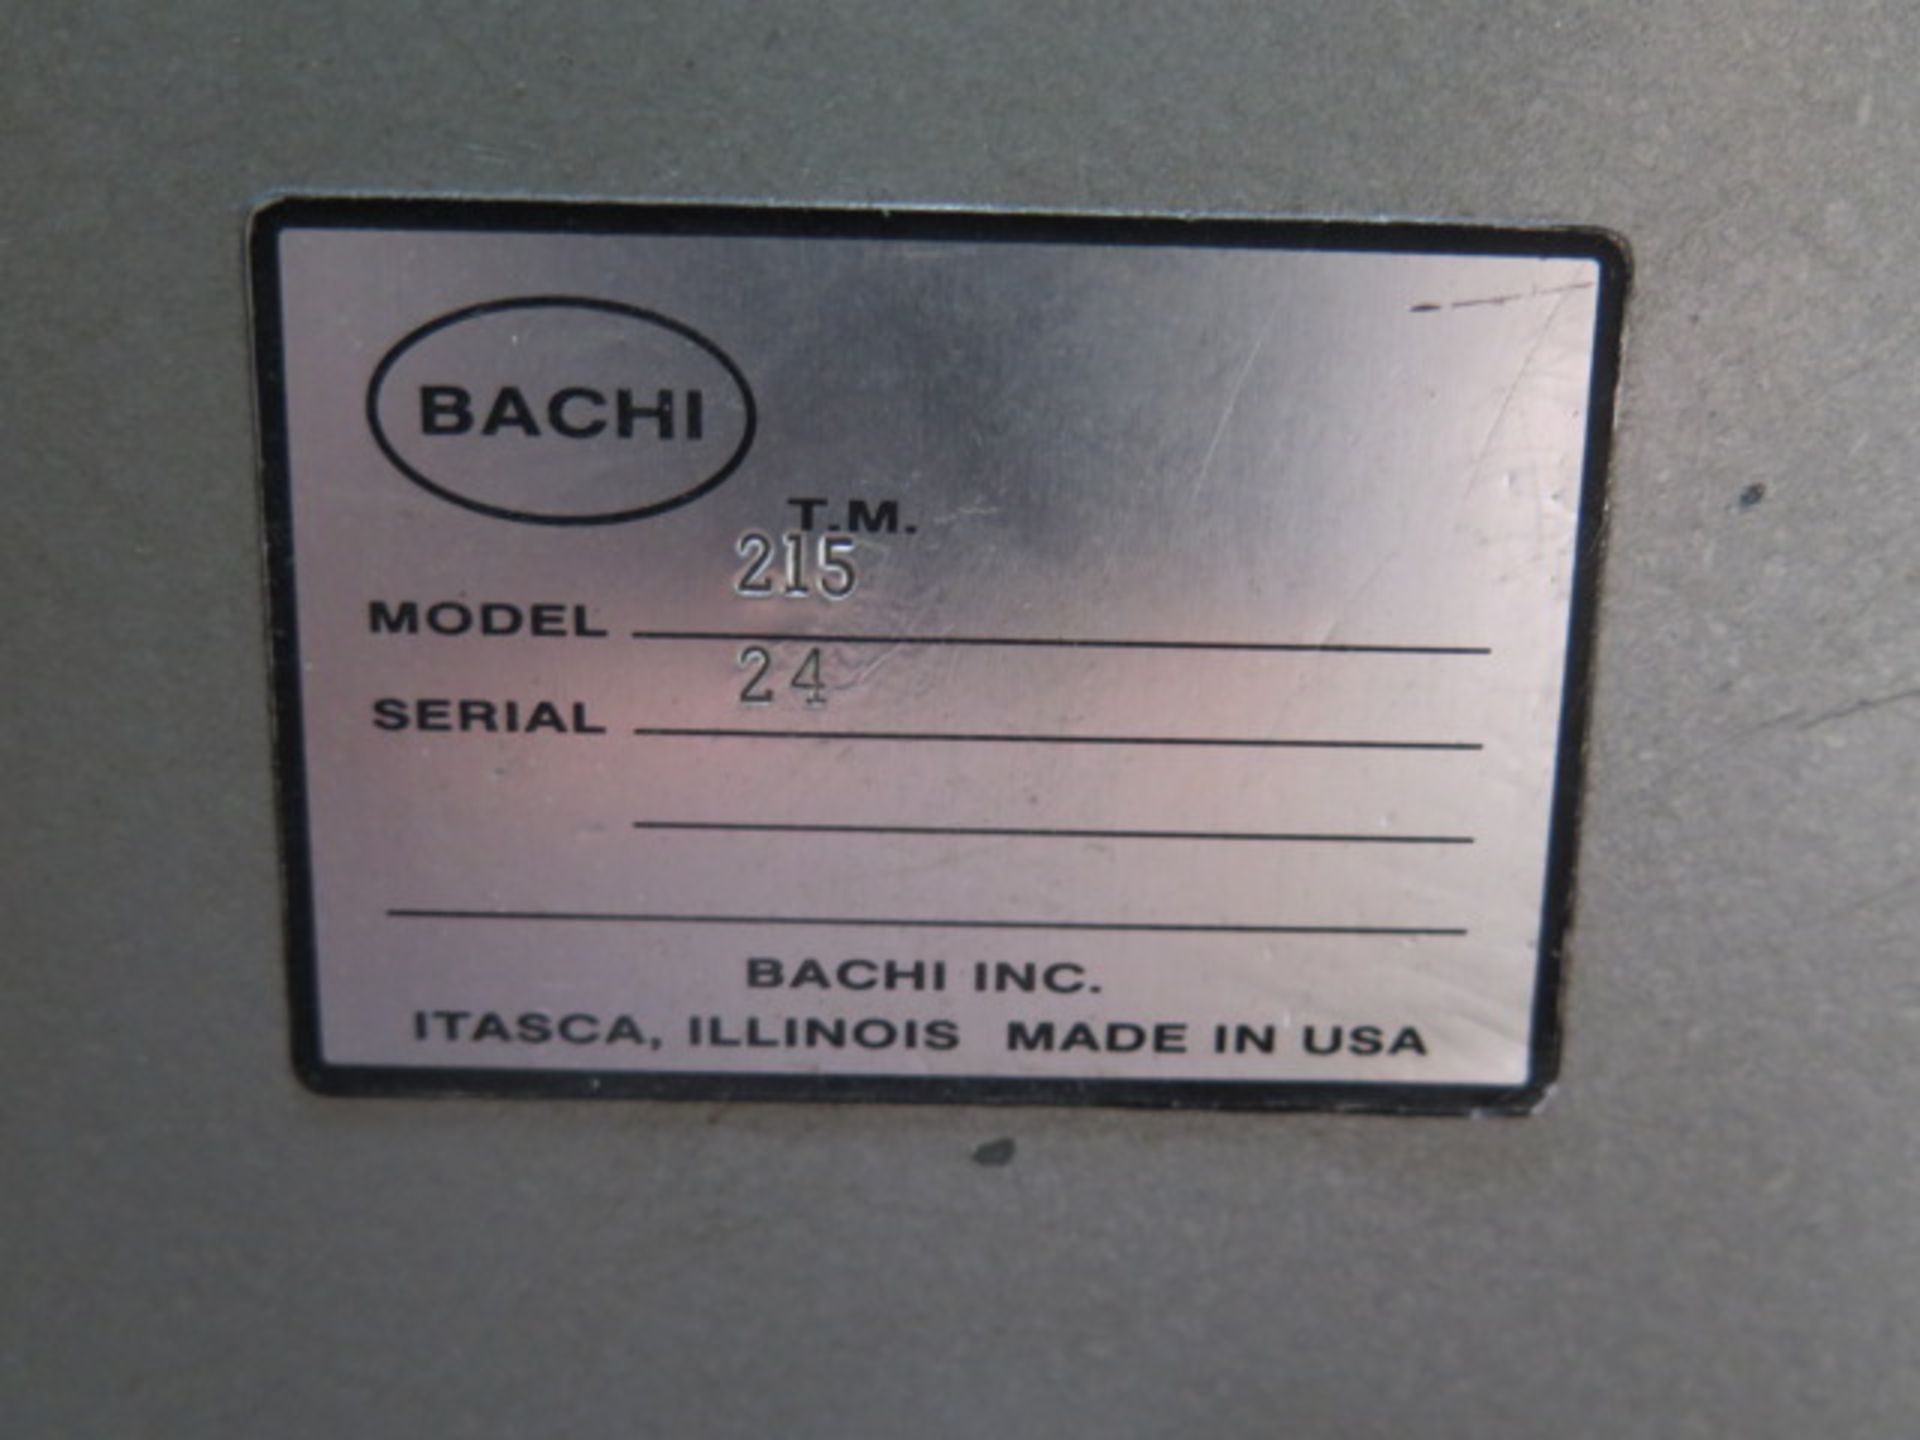 Bachi mdl. 215 Coil Winder s/n 24 (SOLD AS-IS - NO WARRANTY) - Image 11 of 11